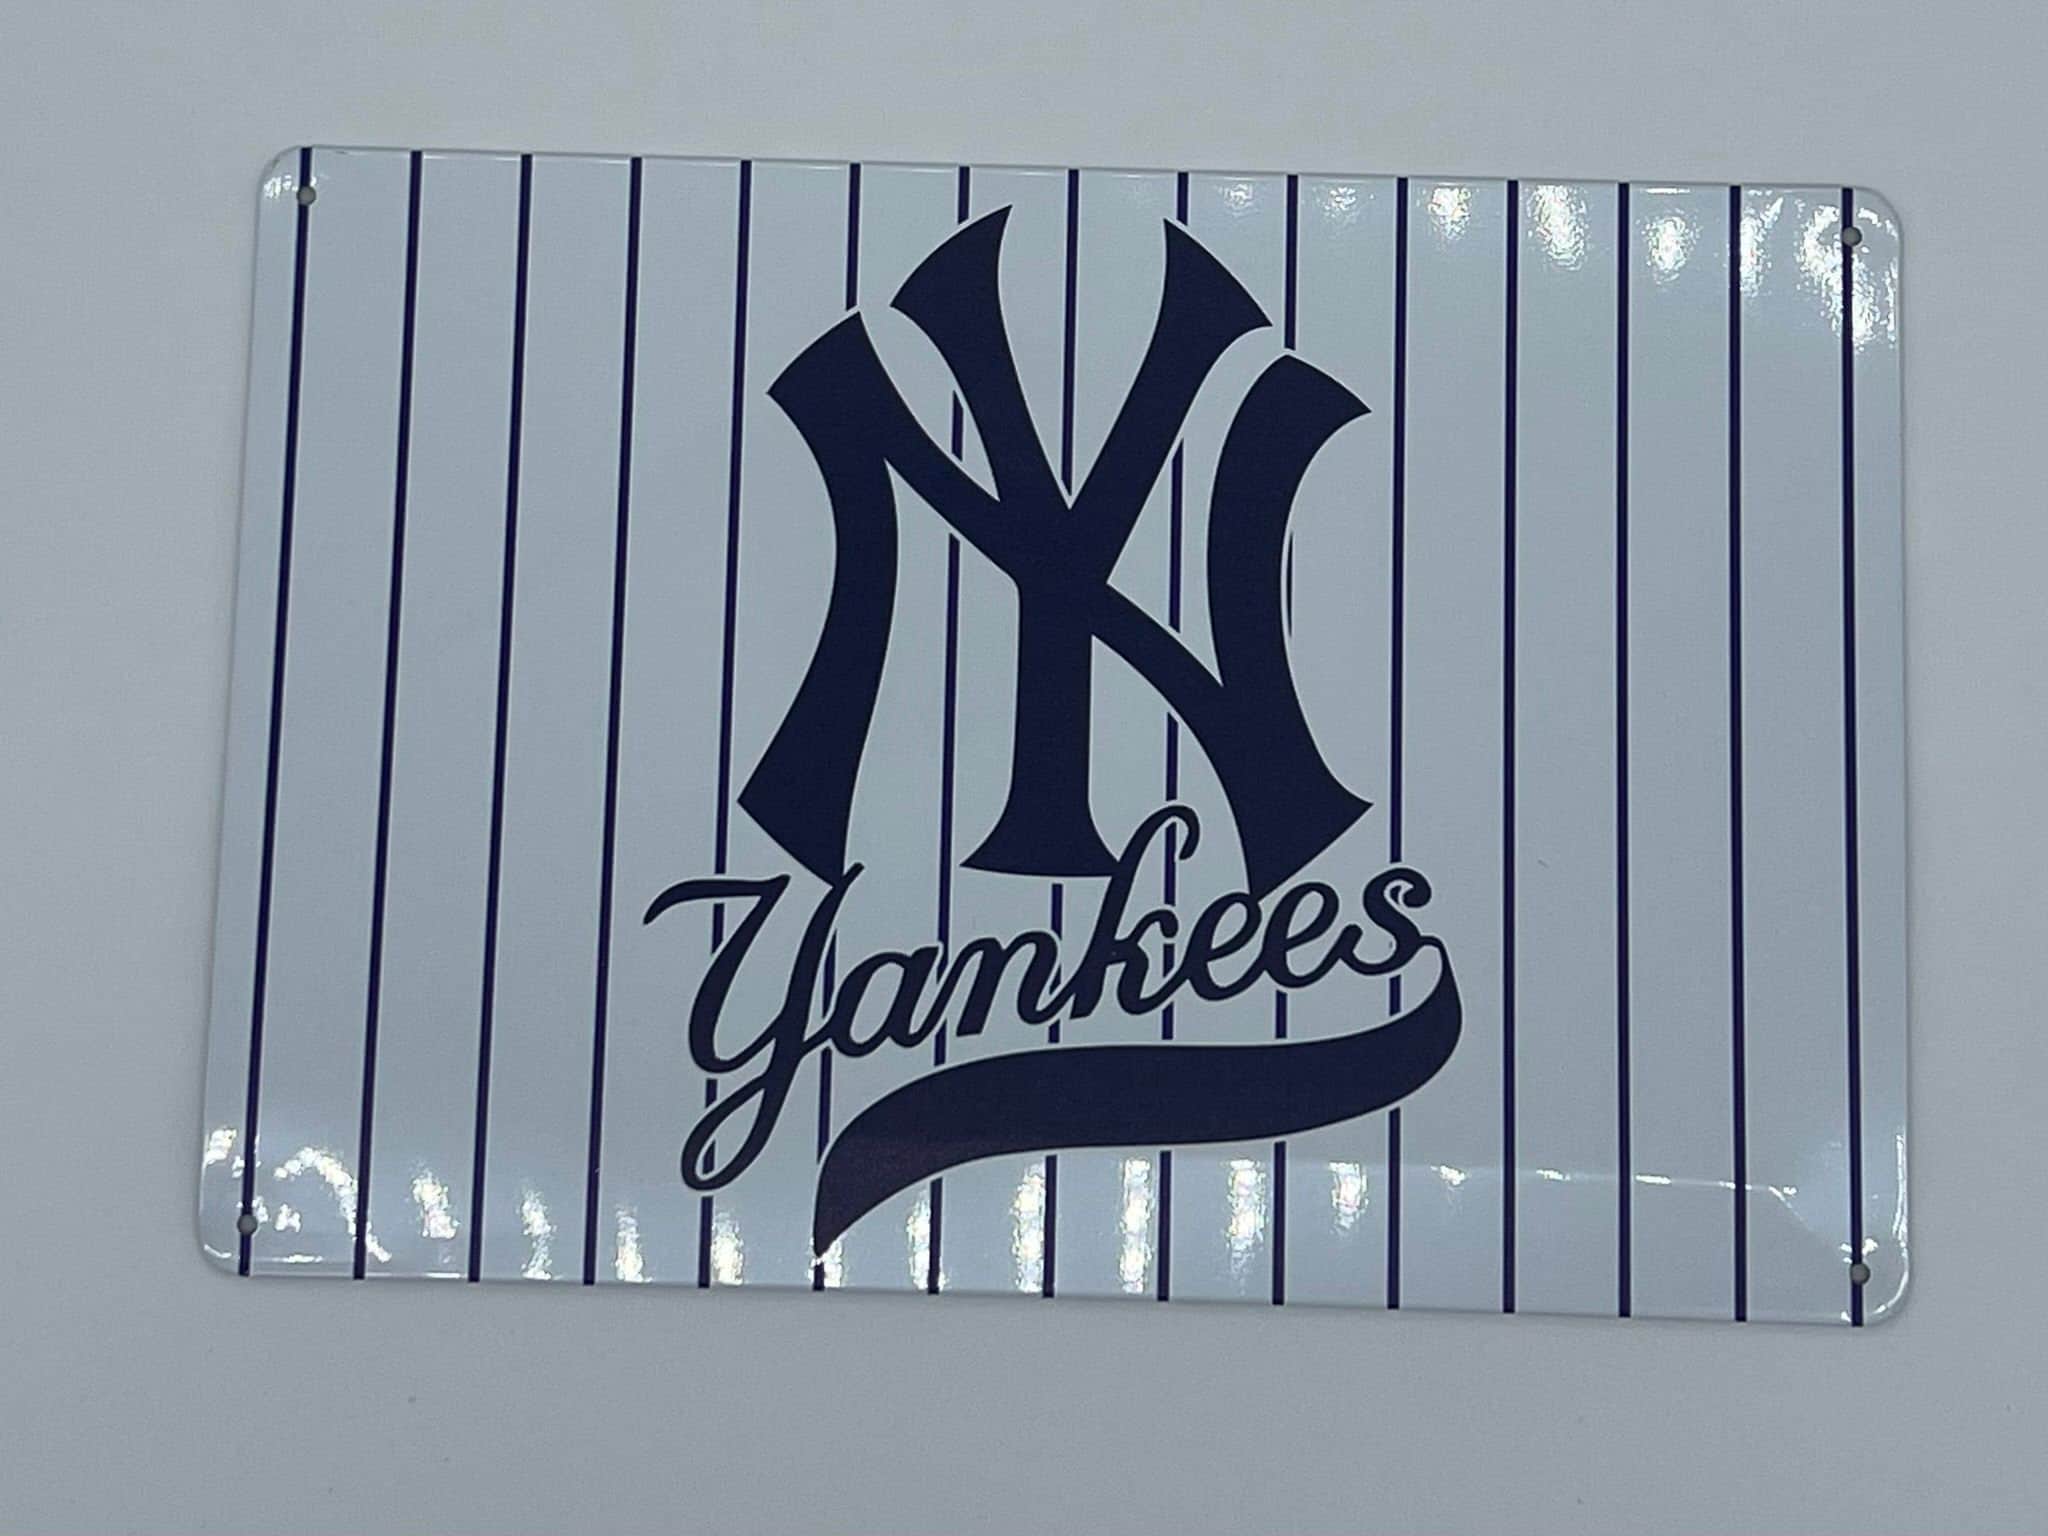 New York Yankees NY Baseball USA metal plate license plate Vintage gift sports displays arts and crafts projects honkbal ball license plate - #1 fan